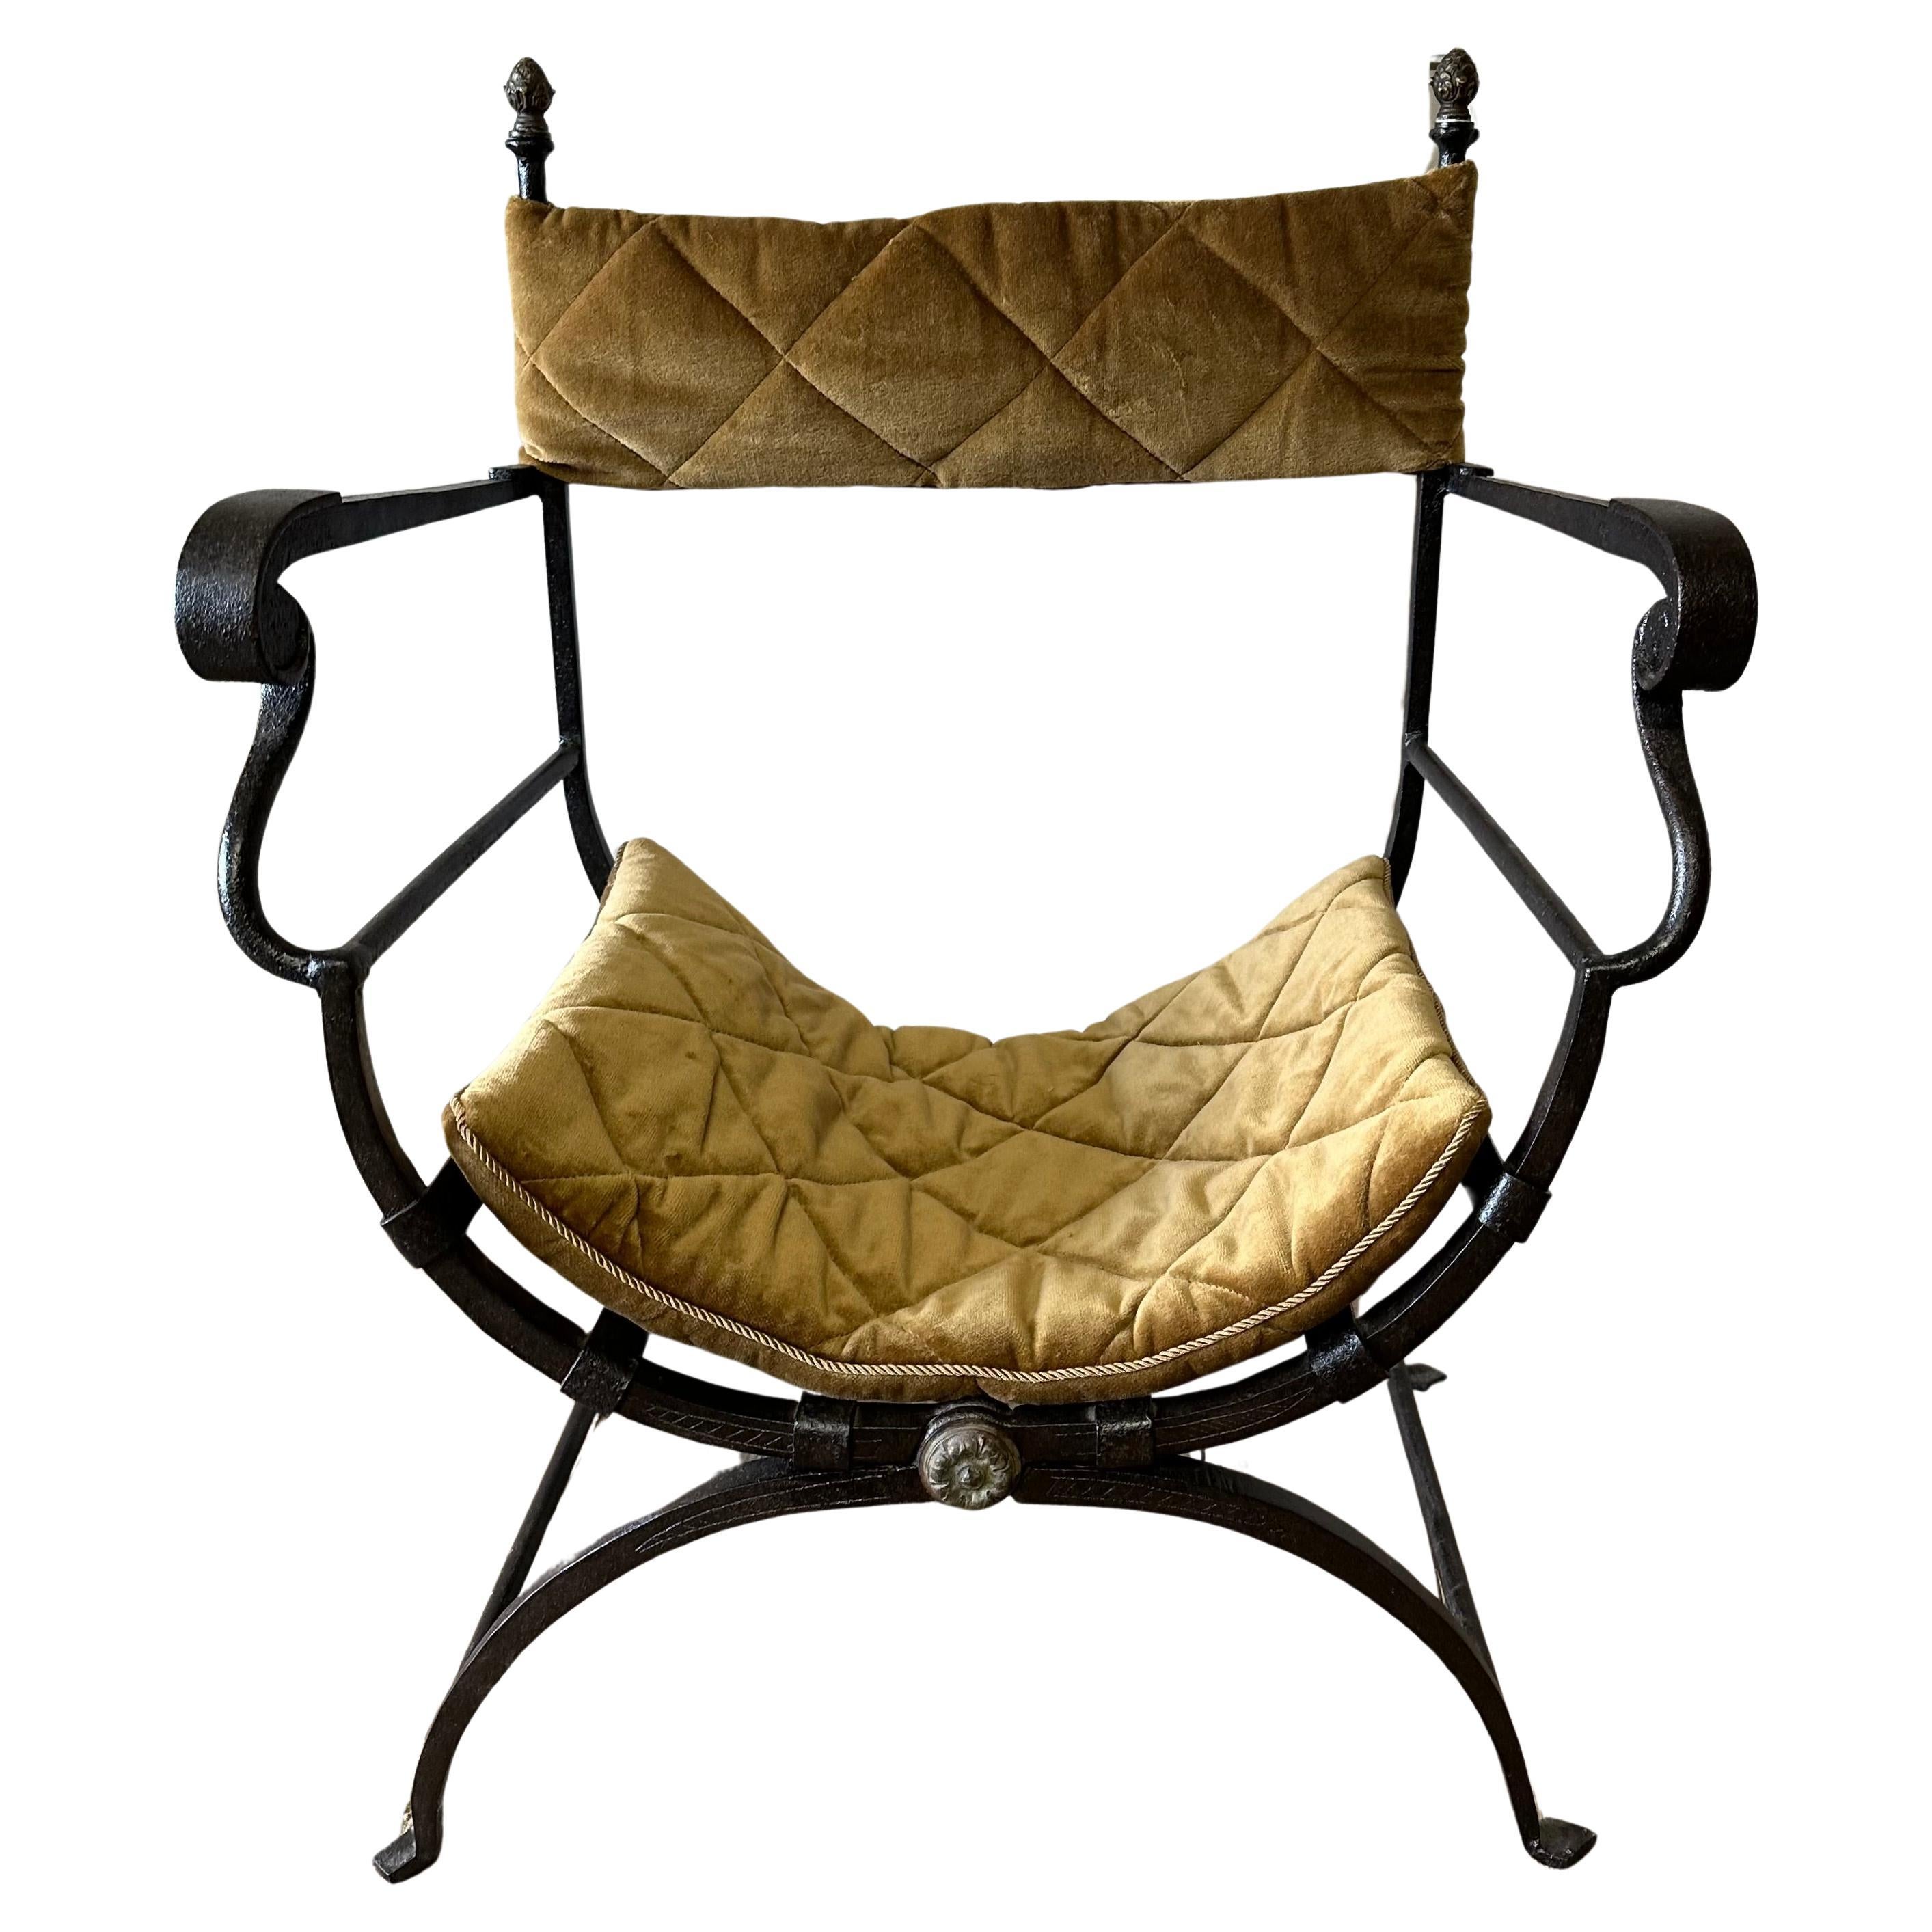 Stunning Italian iron Savonarola Dante chair also known as x chairs or Curule chairs. Featuring an iron frame that folds in a Campaign style with bronze-mounted finials. A sling back rest and cushion seat made of vintage quilted velvet adding style